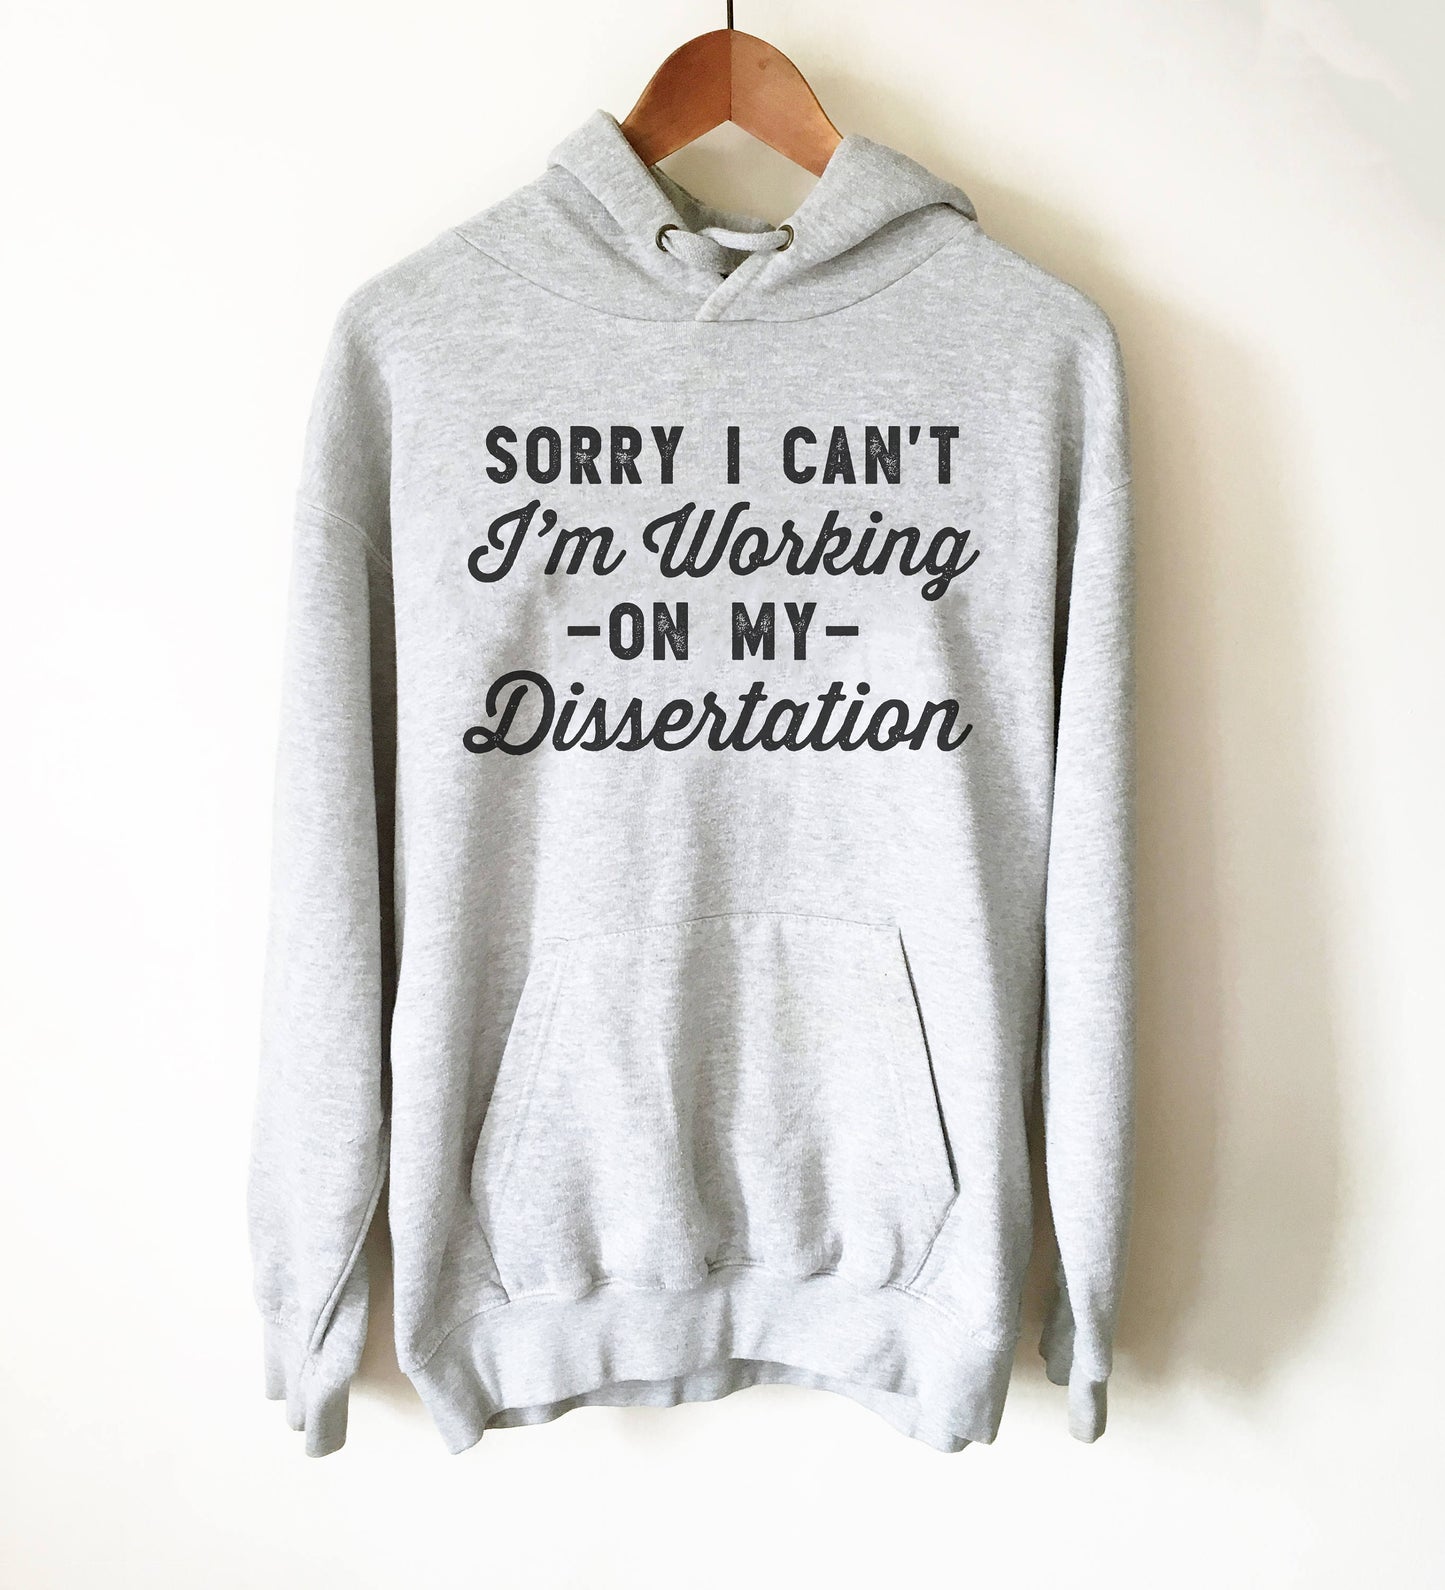 Sorry I Can't I'm Working On My Dissertation Hoodie -Phd Gift, Doctorate Degree, Doctor Shirts, Phd Student, College Student Gift, Phd Shirt